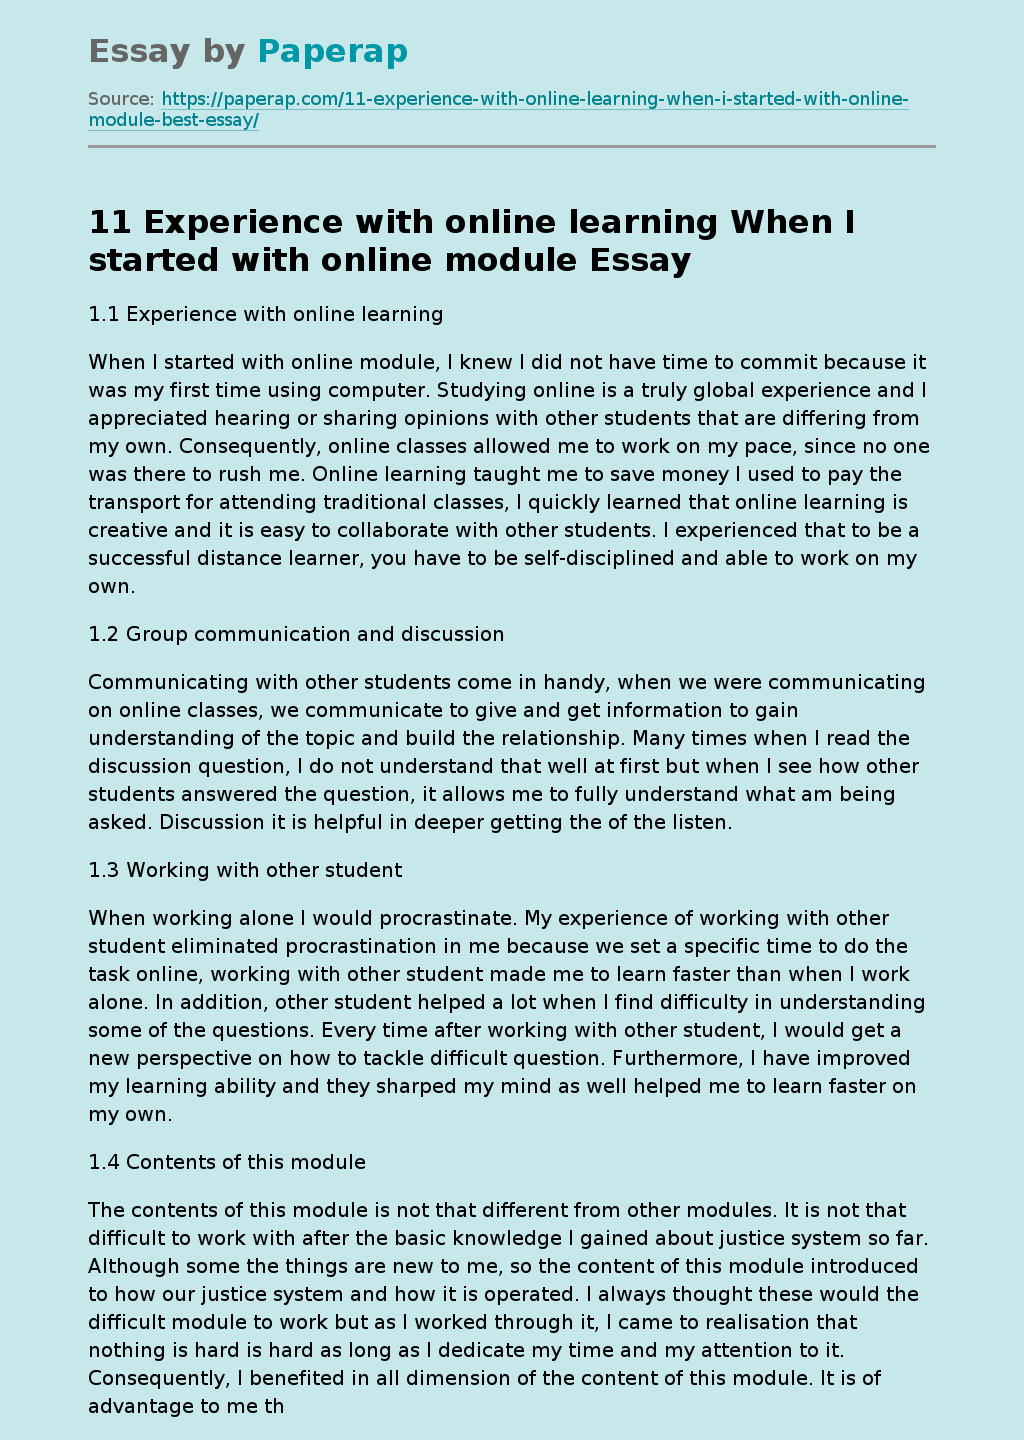 11 Experience with online learning When I started with online module